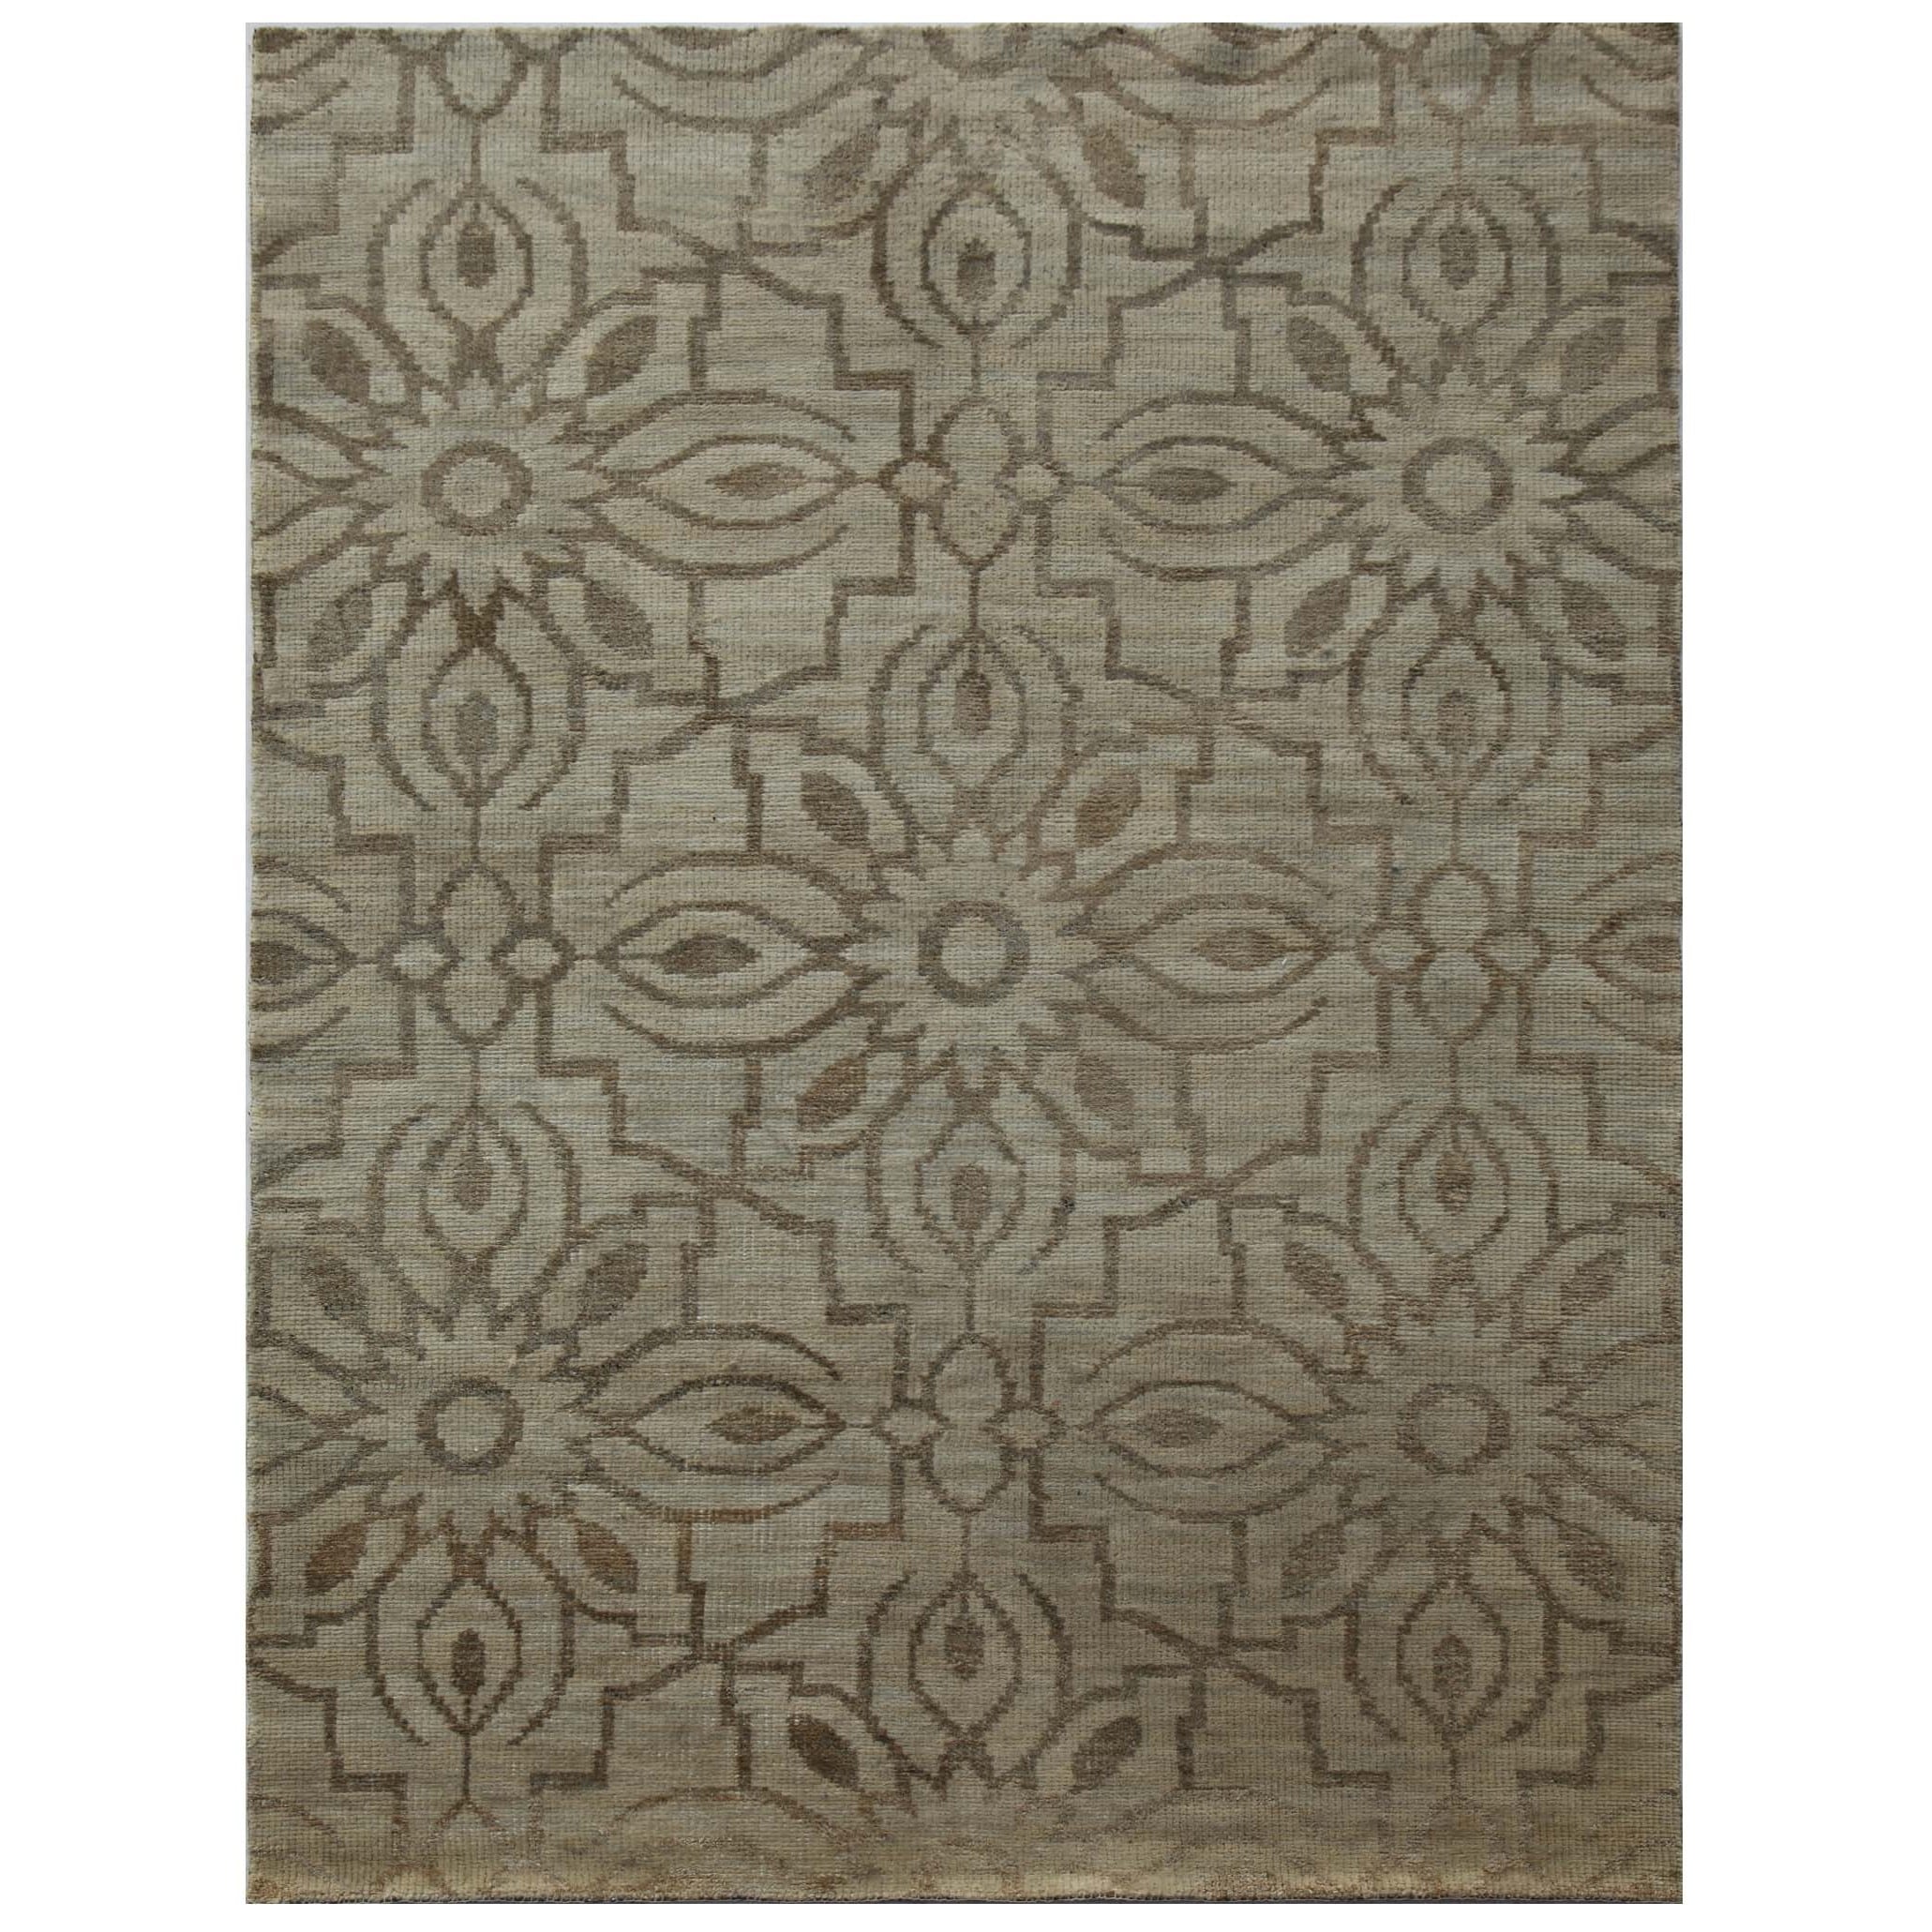 Hand knotted Ivory Floral Pattern Wool/ Silk Rug (5 X 8)